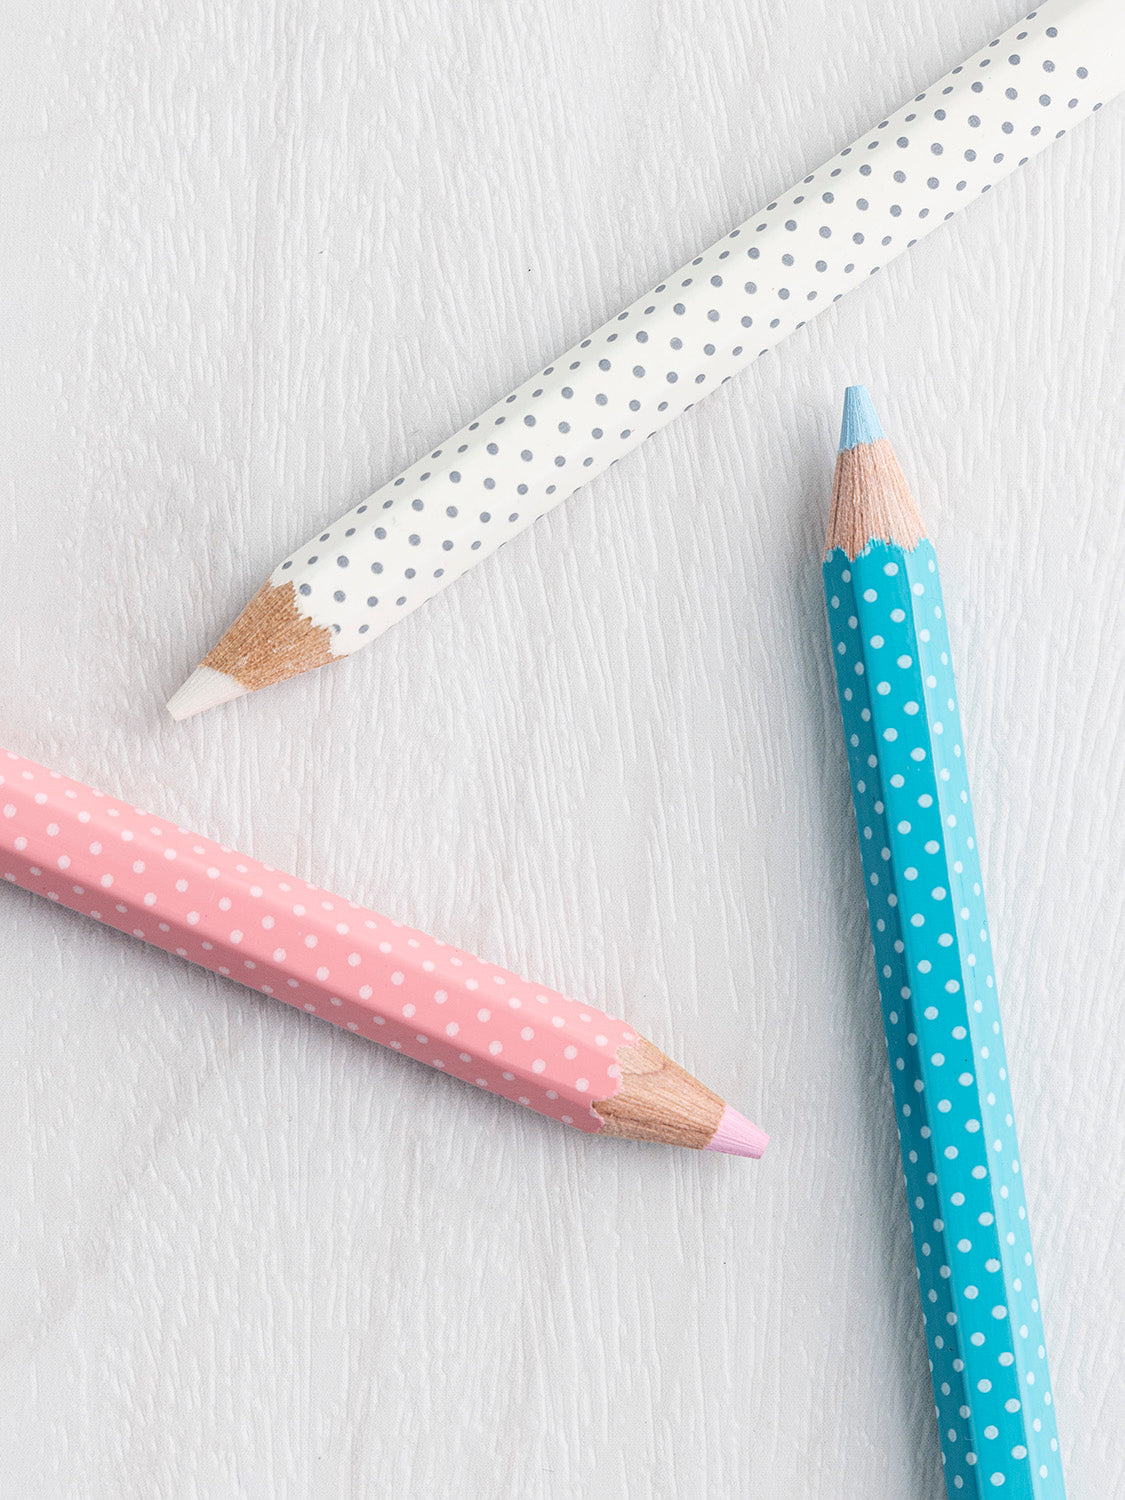 6 Chalk Pencils for sewing - Pink / White / Blue x1 - Perles & Co